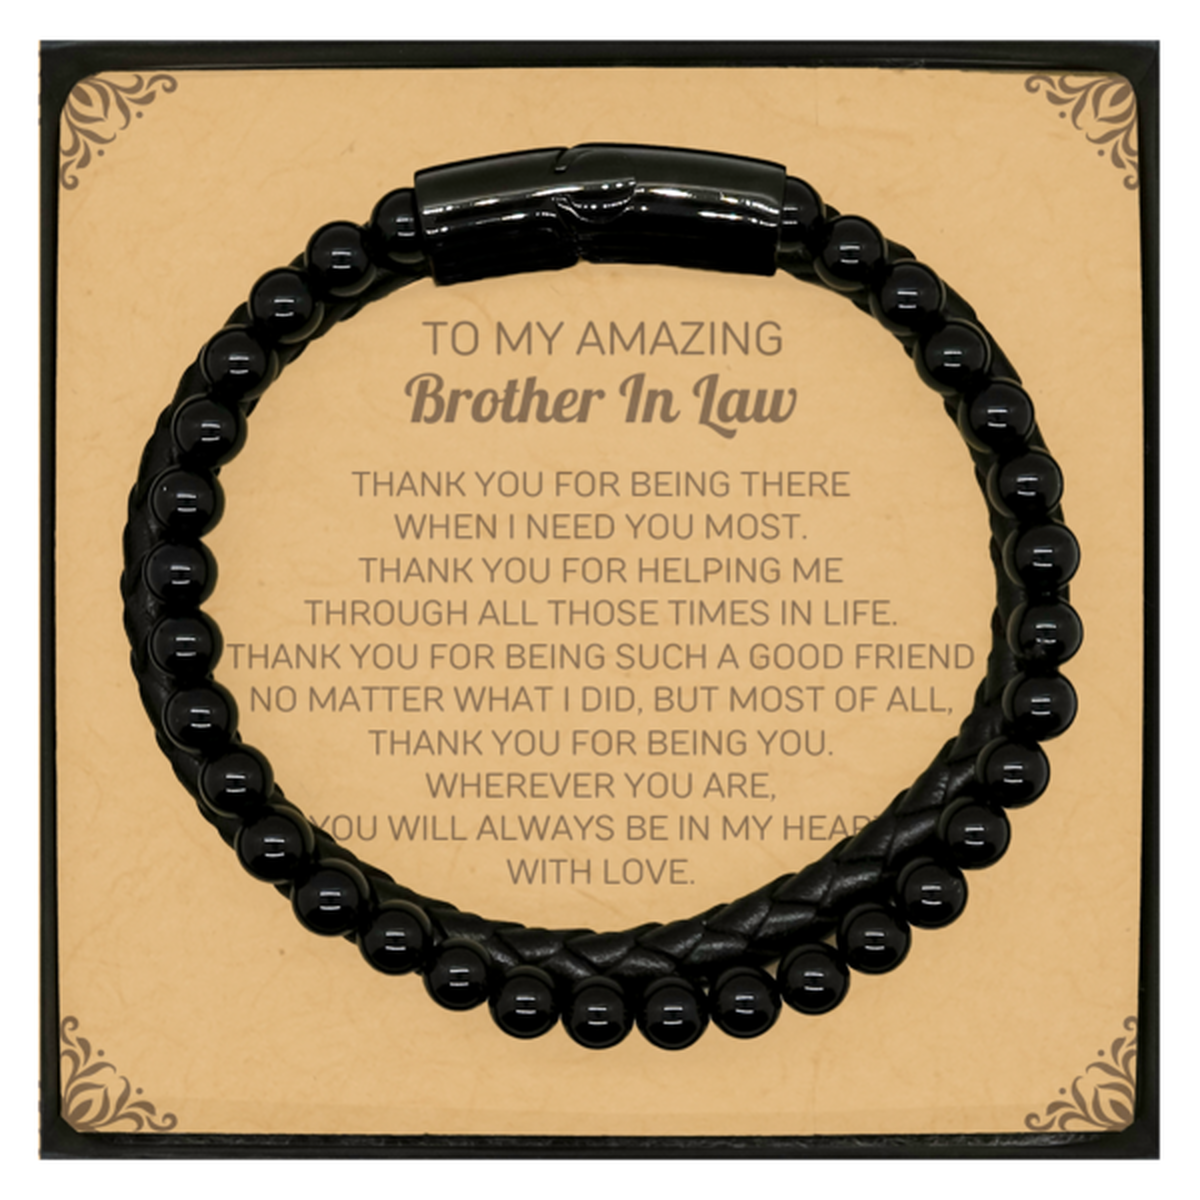 To My Amazing Brother In Law Stone Leather Bracelets, Thank you for being there, Thank You Gifts For Brother In Law, Birthday, Christmas Unique Gifts For Brother In Law